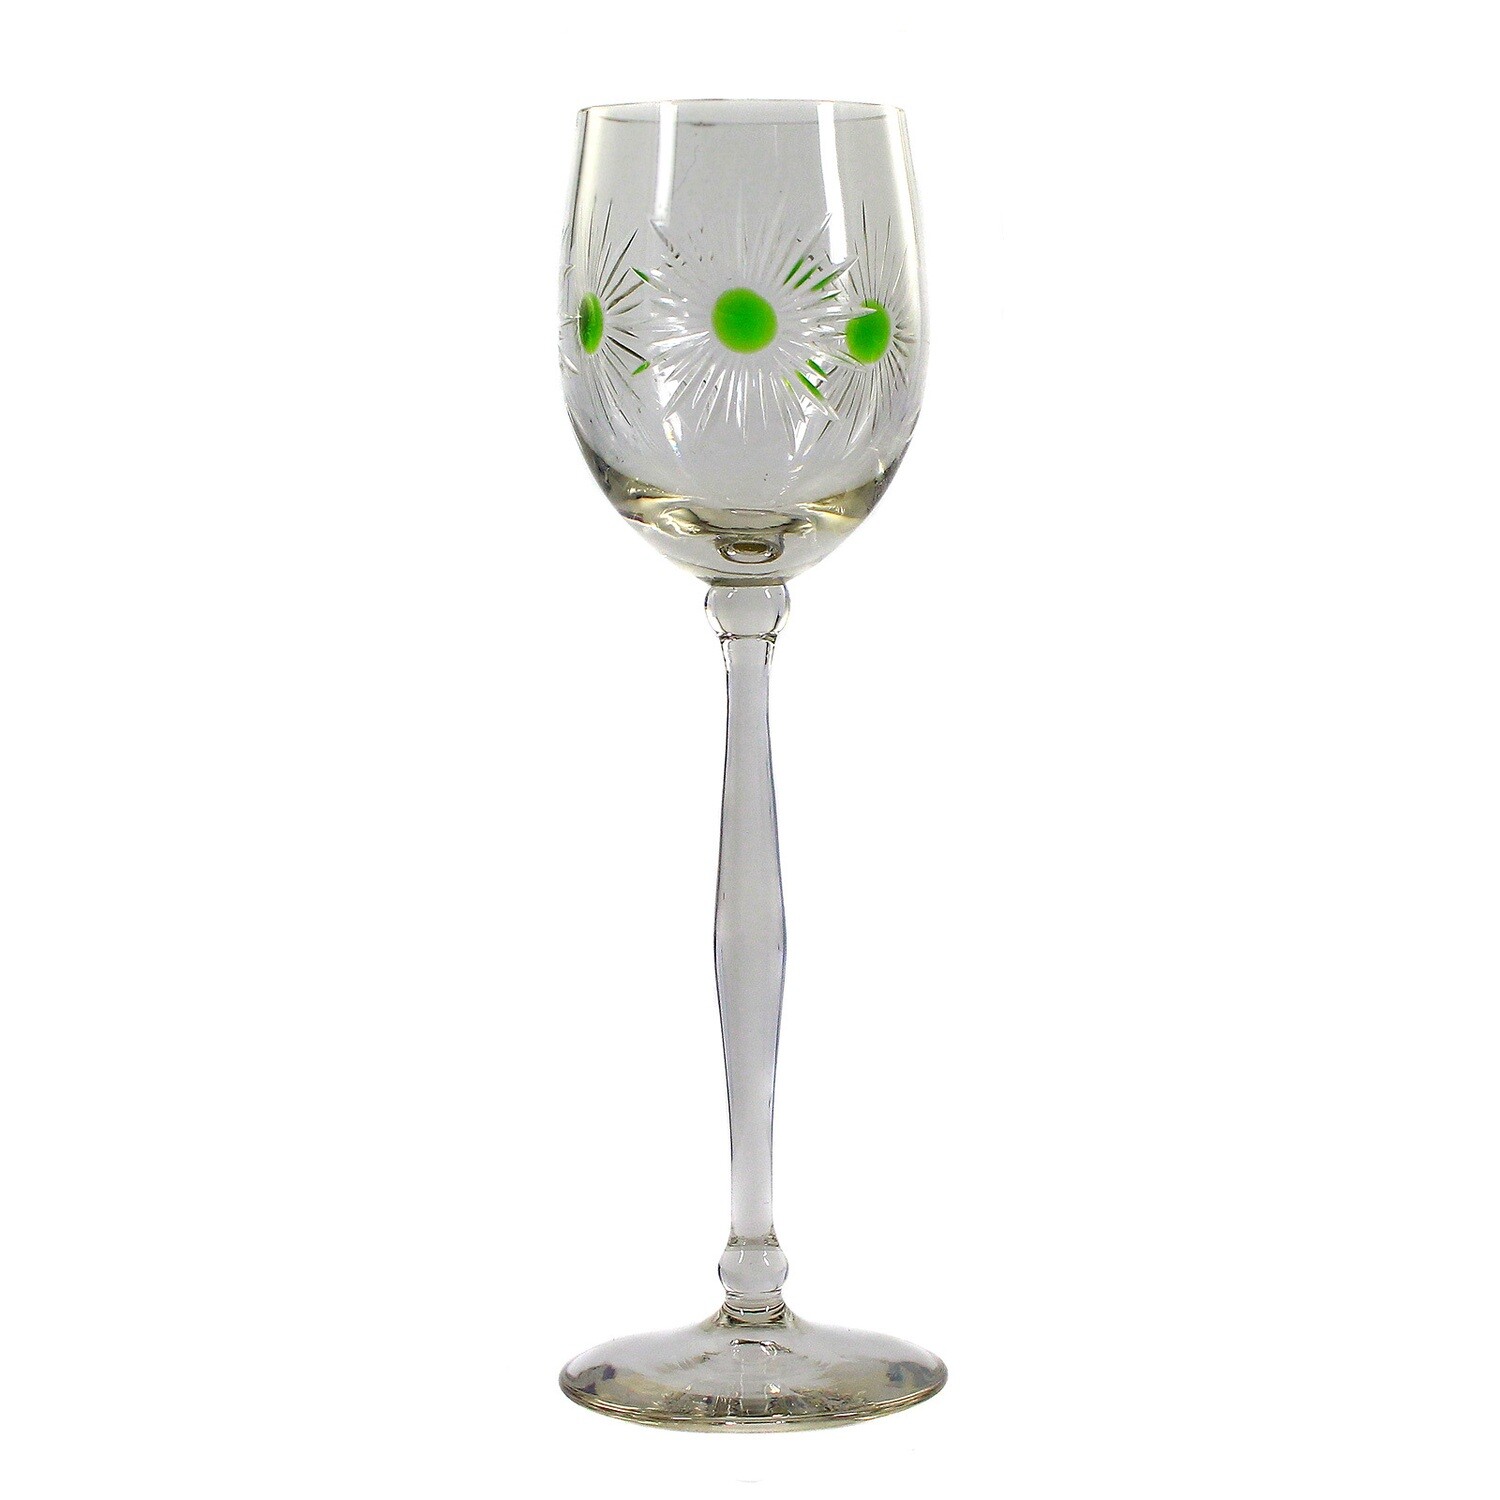 Tall stemmed glass made of colorless glass with applied dots, Jean Beck around 1908.